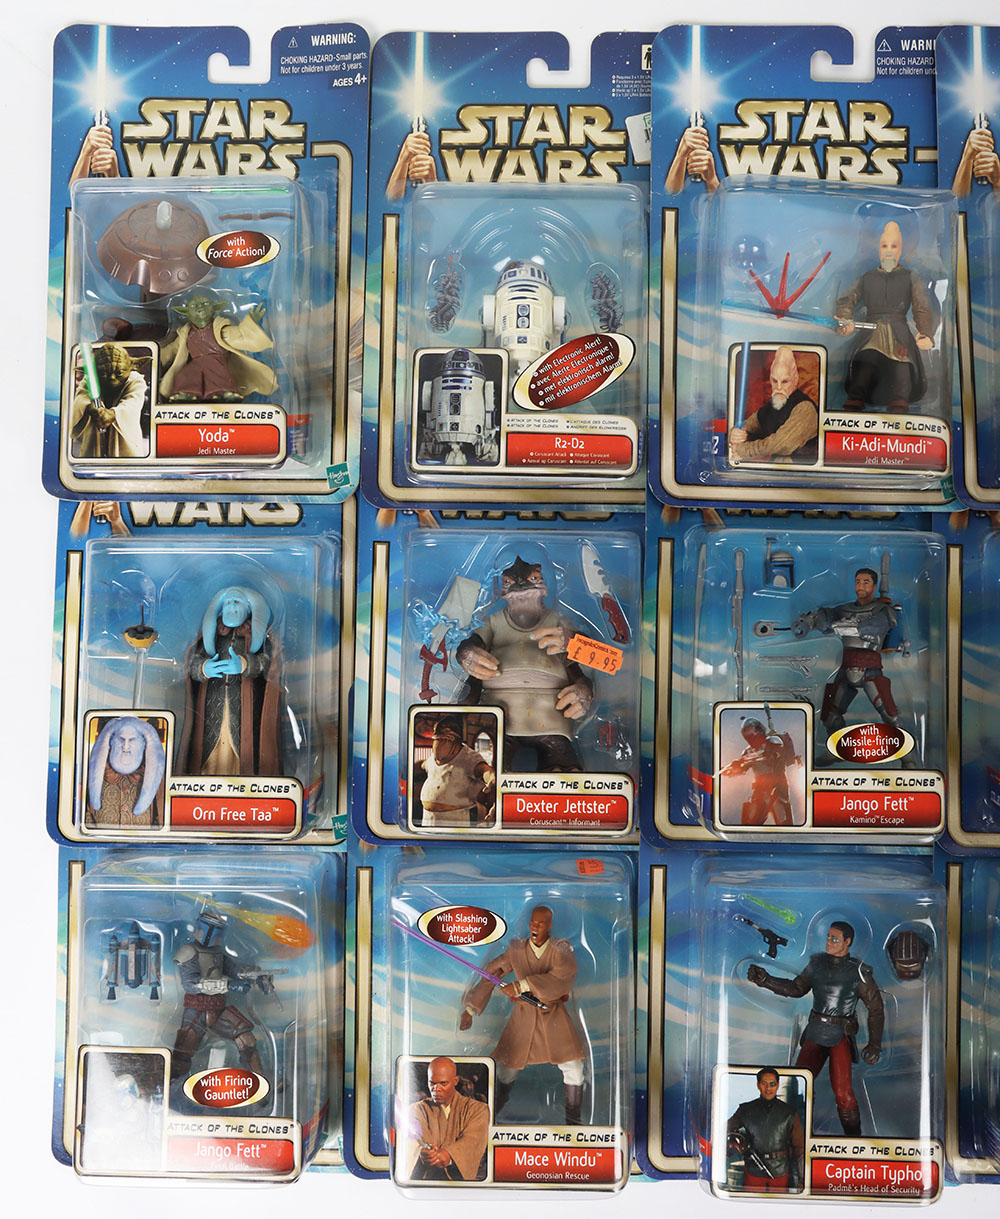 Hasbro Star Wars Carded Action Figures - Image 2 of 3